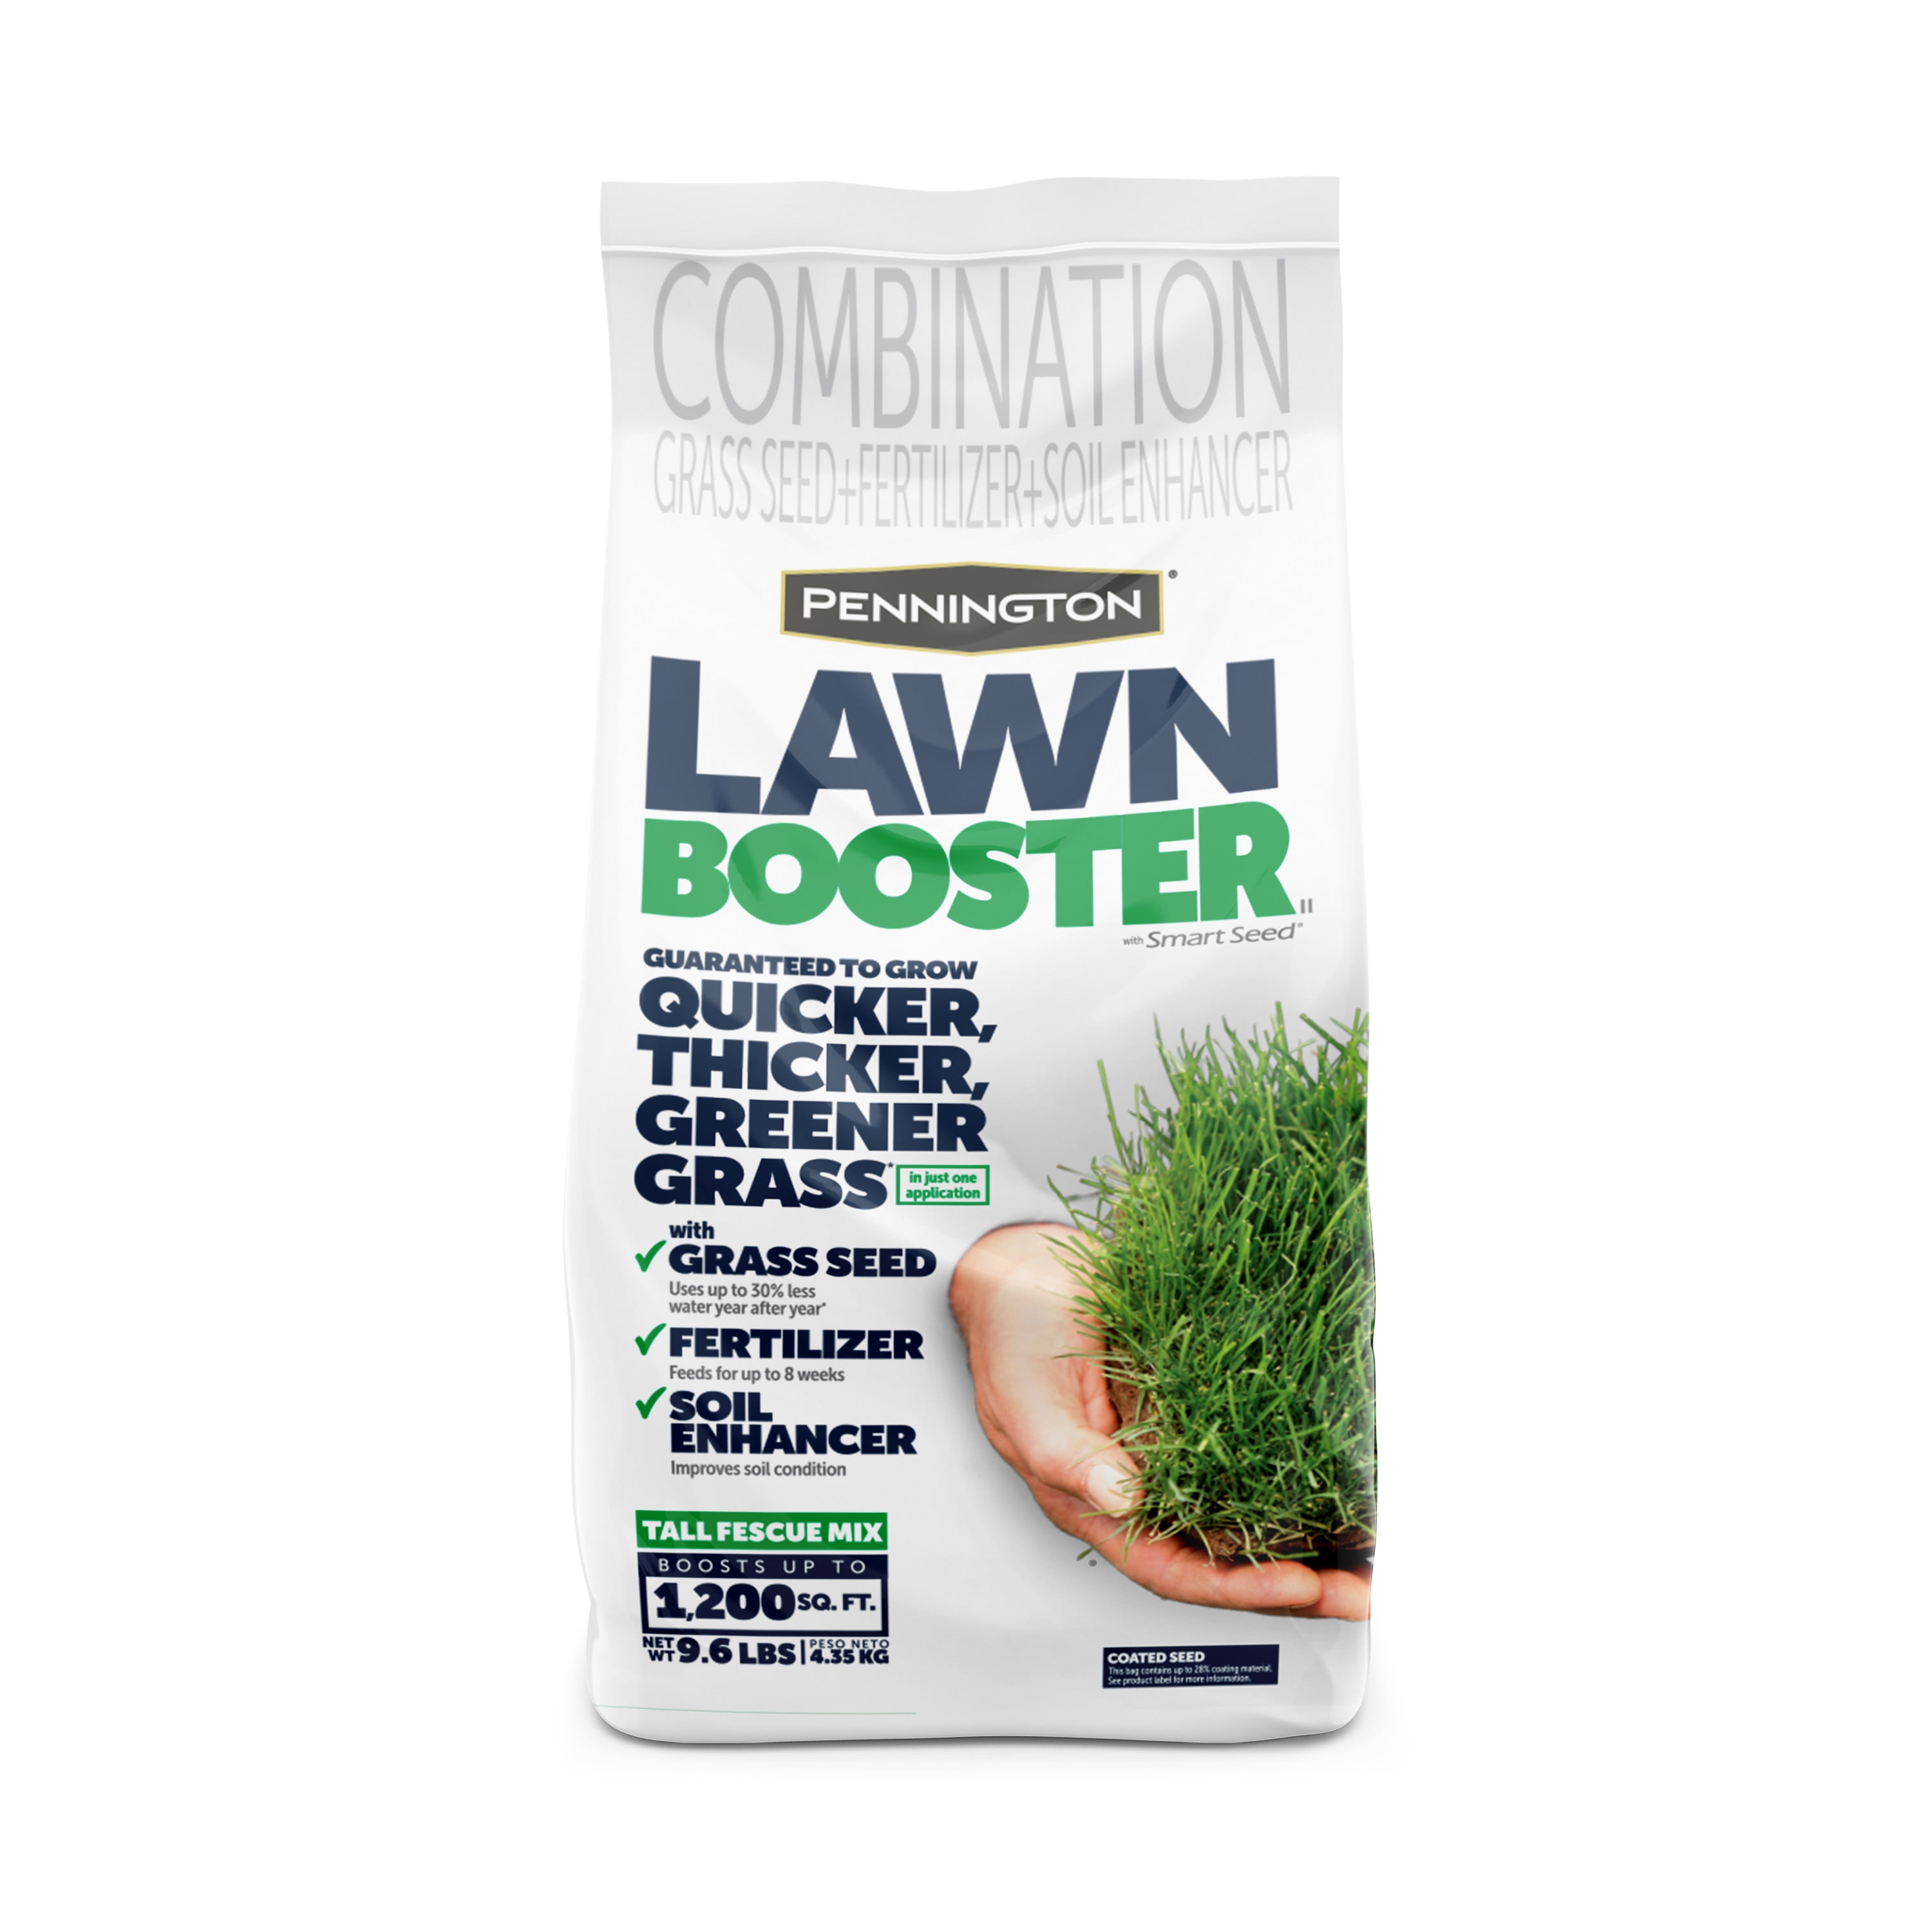 Pennington Lawn Booster Tall Fescue Grass Seed and Fertilizer Mix, for Sun to Partial Shade, 9.6 lb.